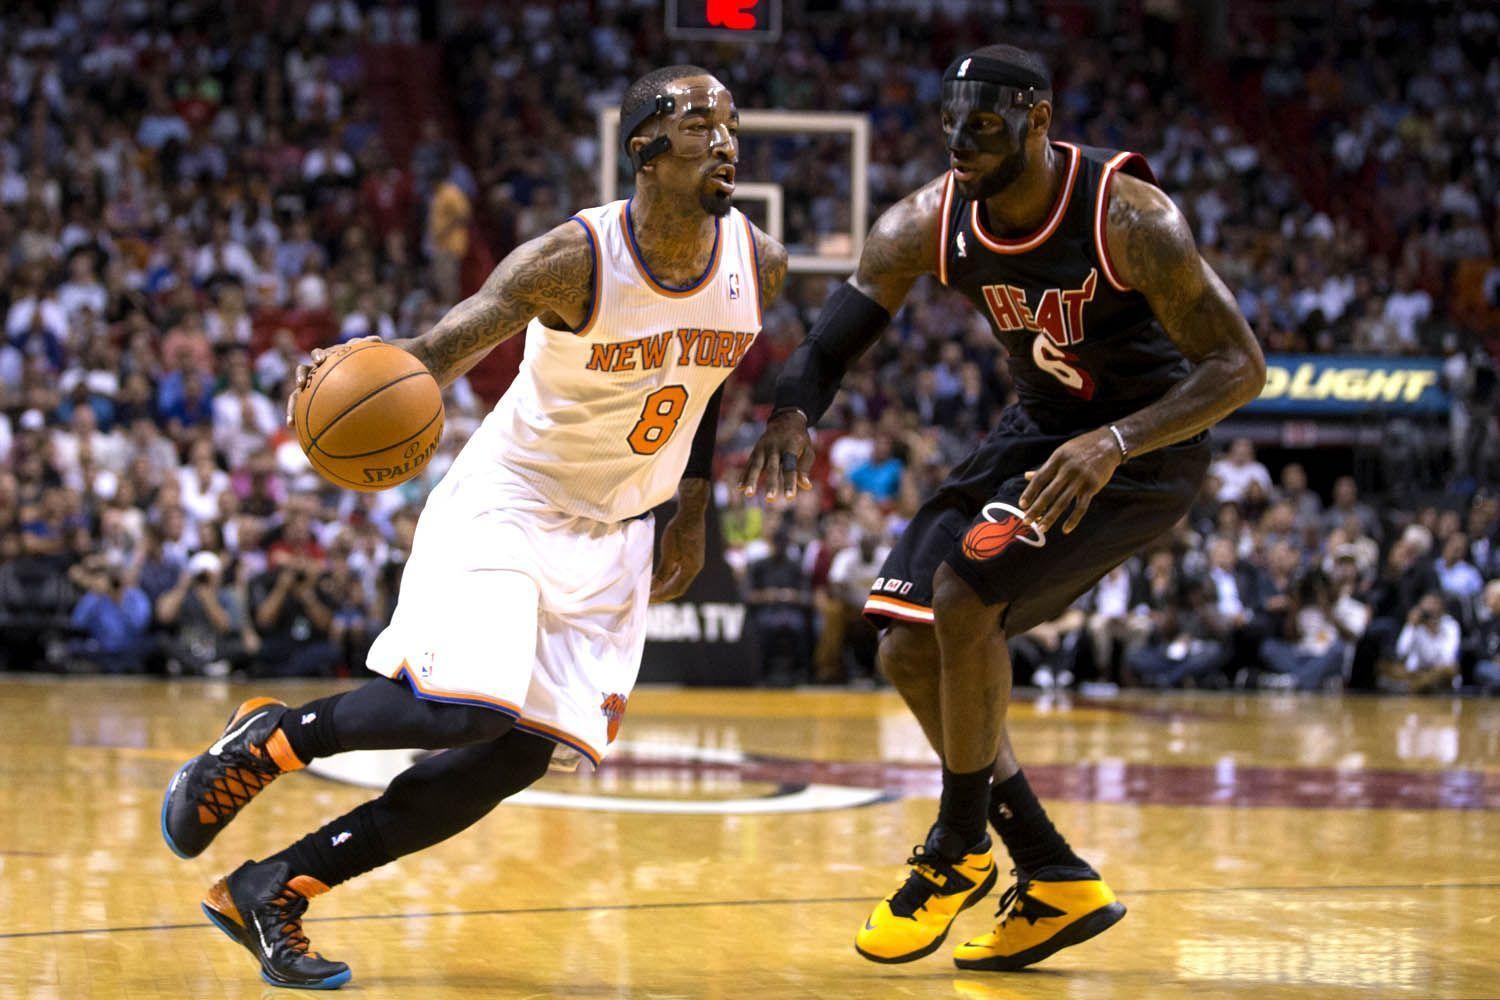 Report: Cavs Consulted With LeBron James on the JR Smith Trade